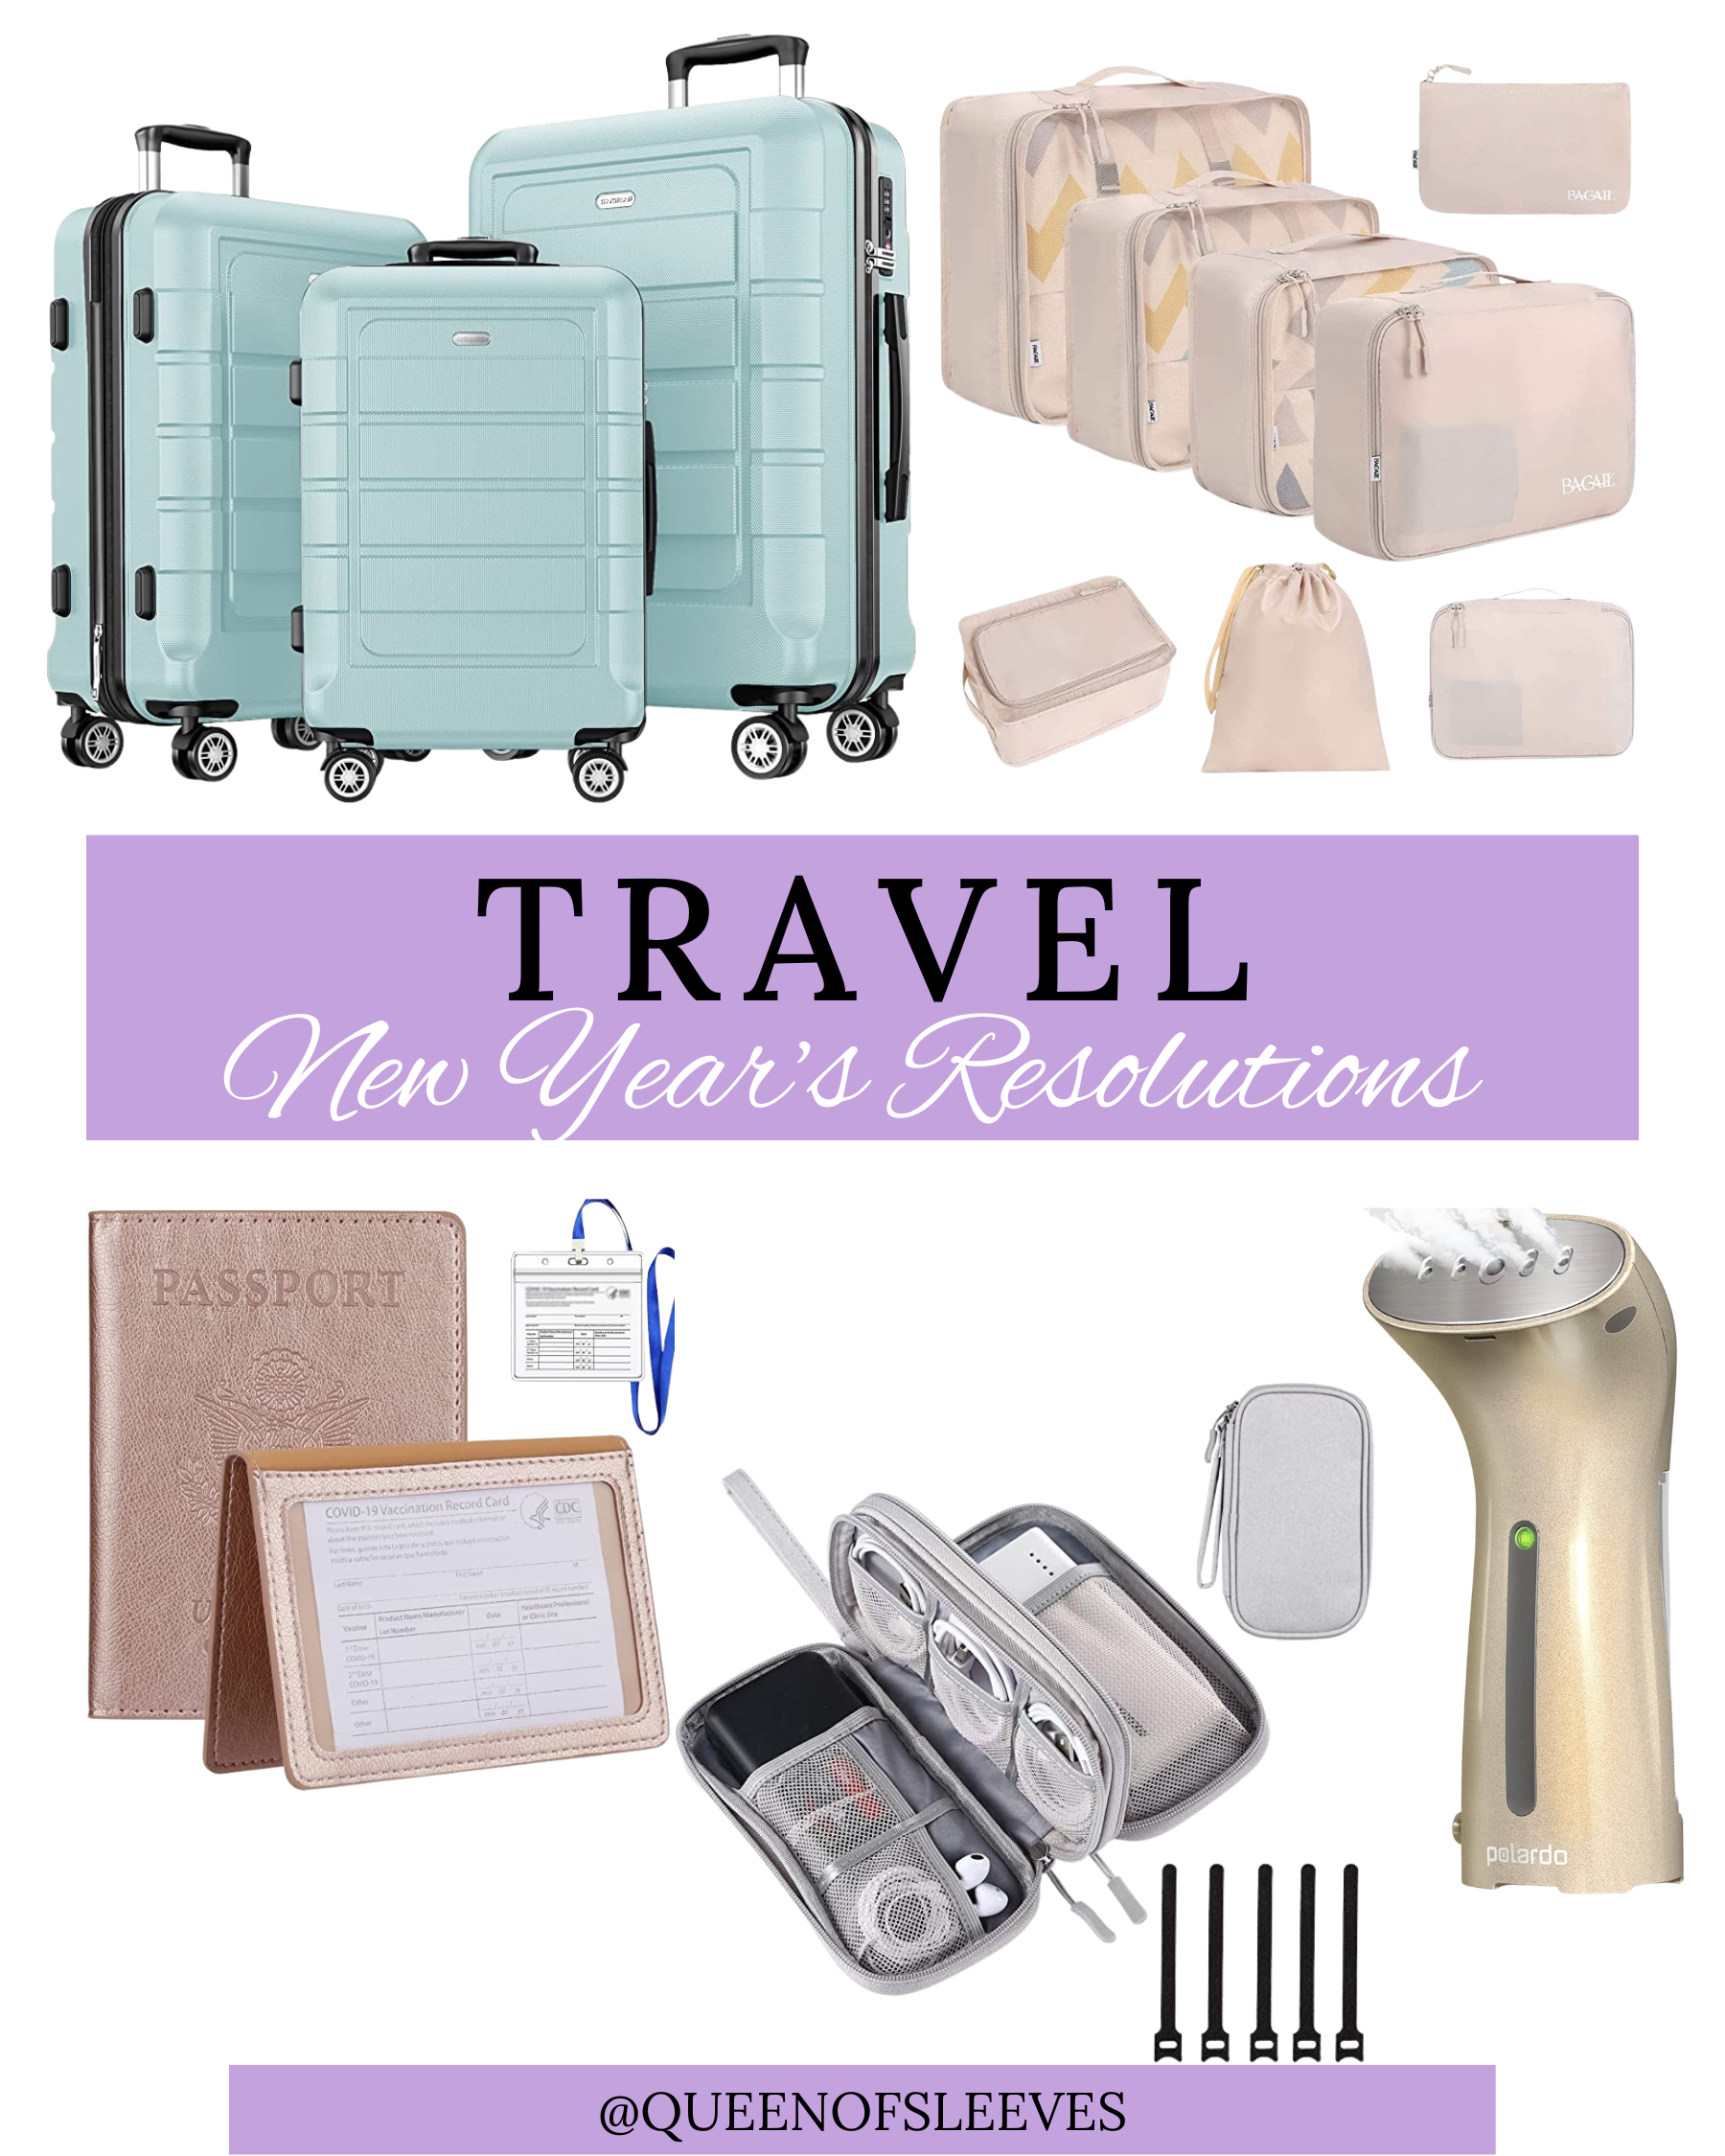 Travel New Year's resolutions